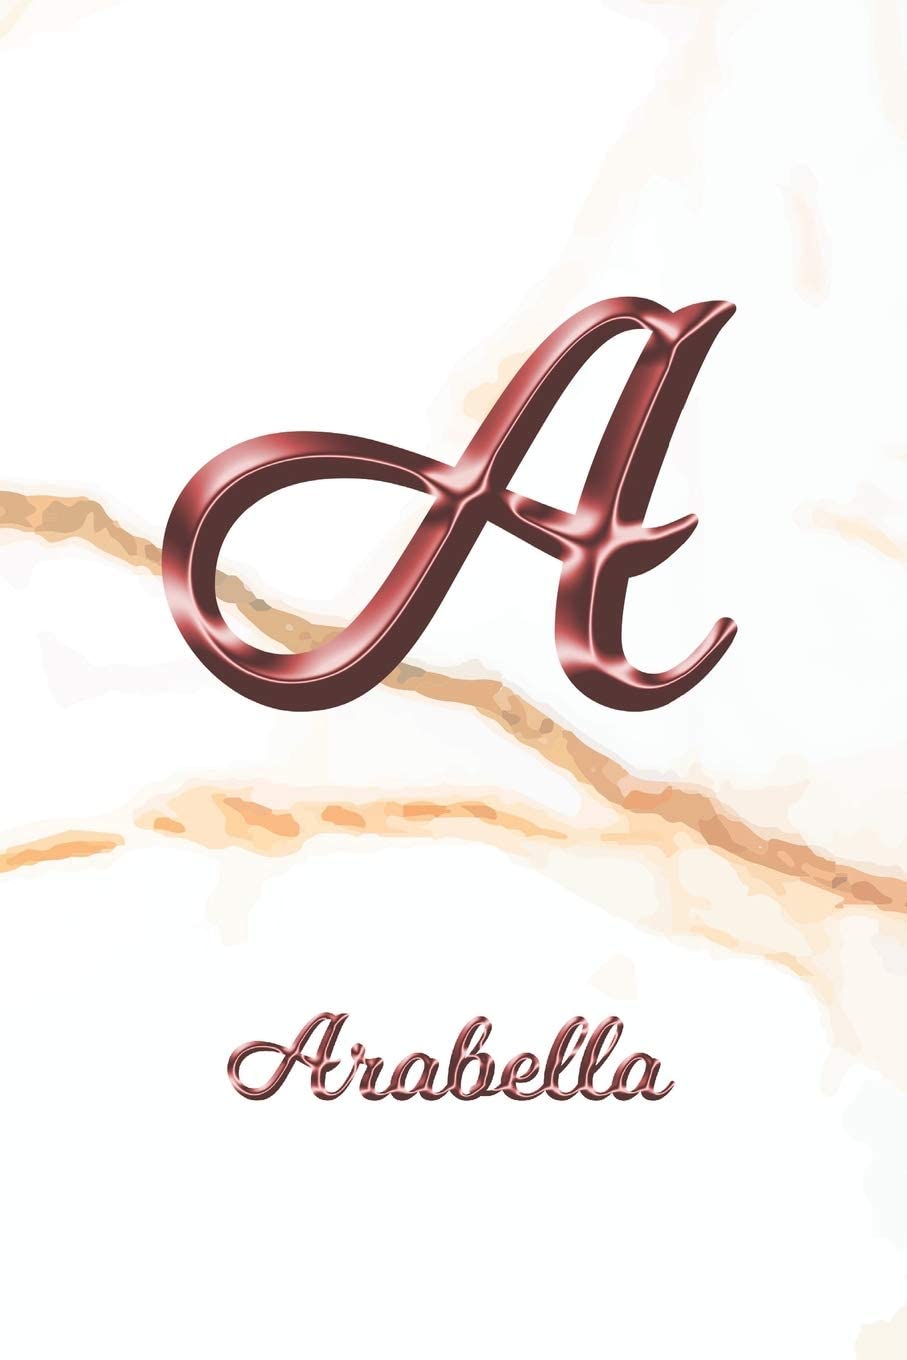 Arabella: Sketchbook | Blank Imaginative Sketch Book Paper | Letter A Rose Gold White Marble Pink Effect Cover | Teach &amp; Practice Drawing for ... Doodle Pad | Create, Imagine &amp; Learn to Draw